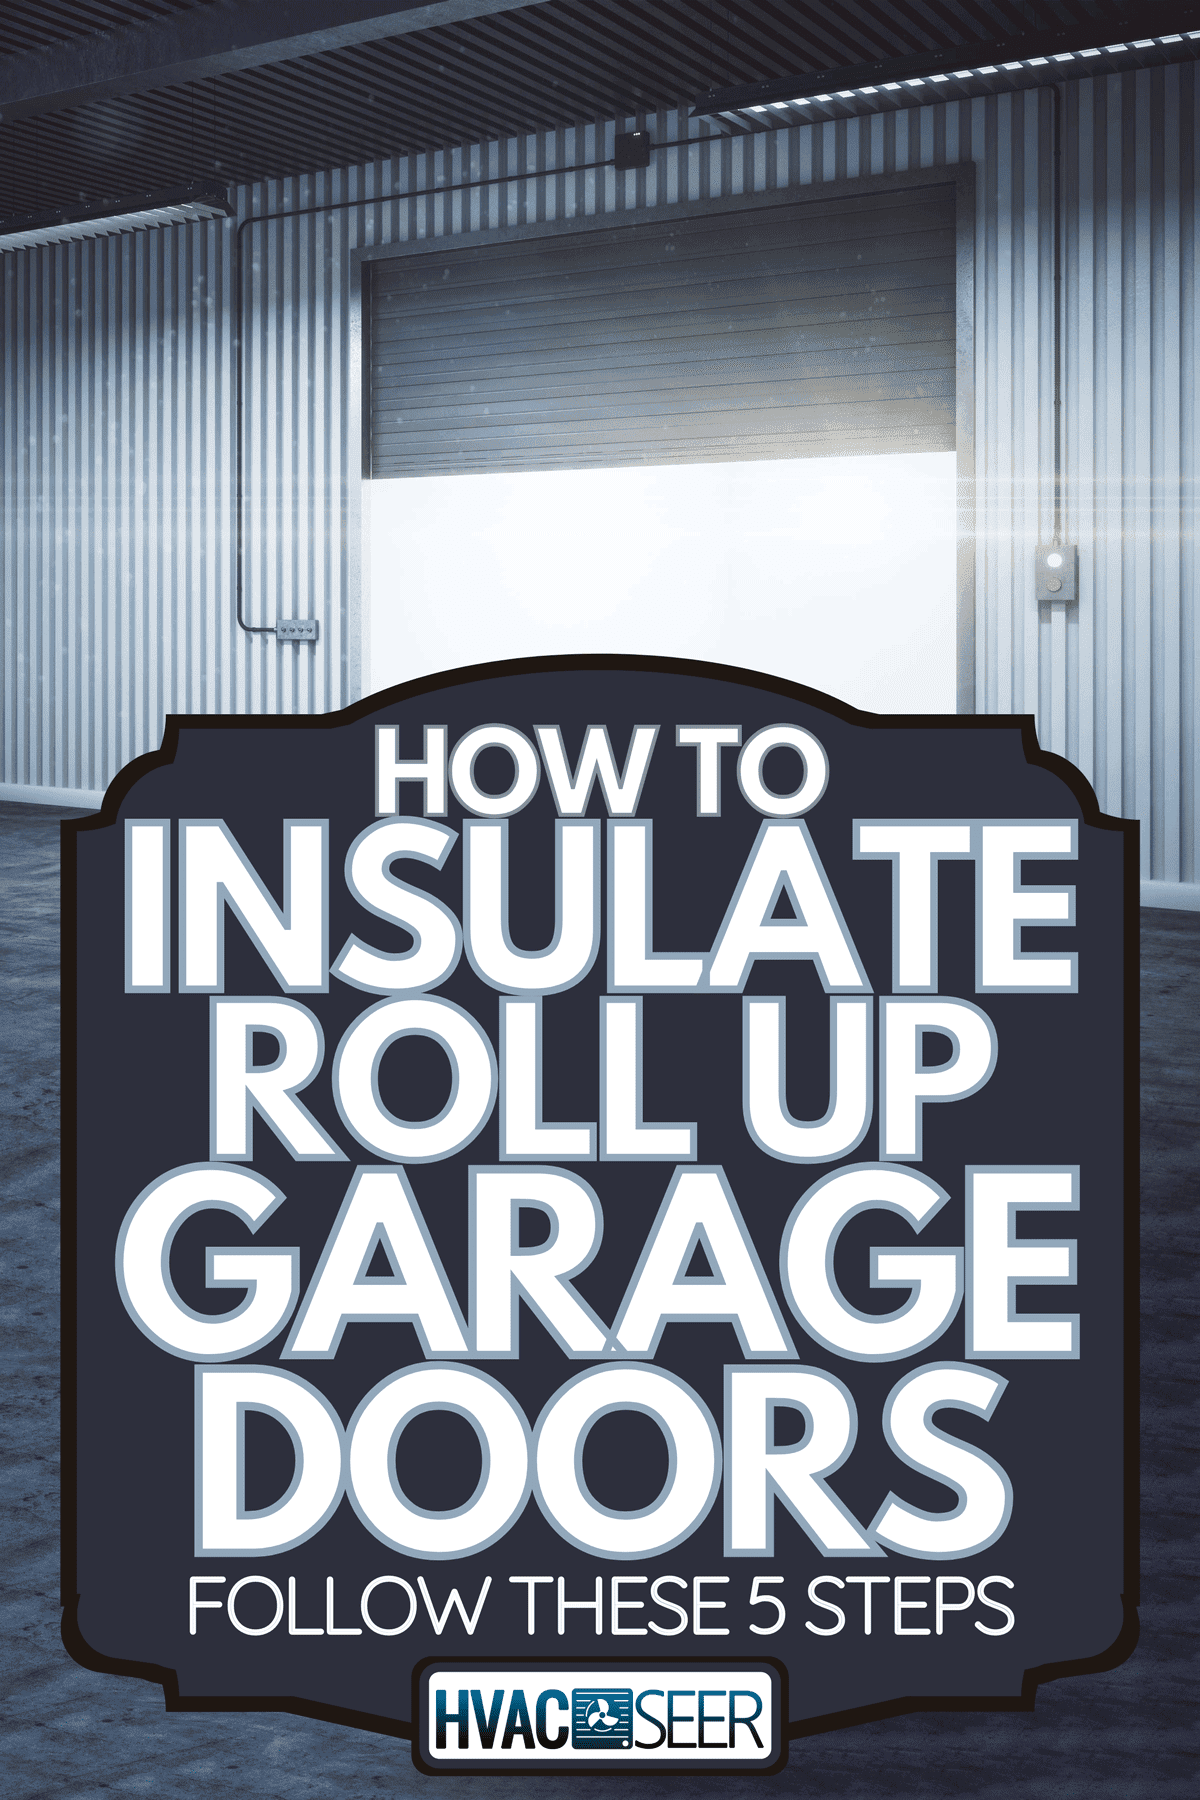 Clean garage room with rolling gates, How To Insulate Roll Up Garage Doors [Follow These 5 Steps]